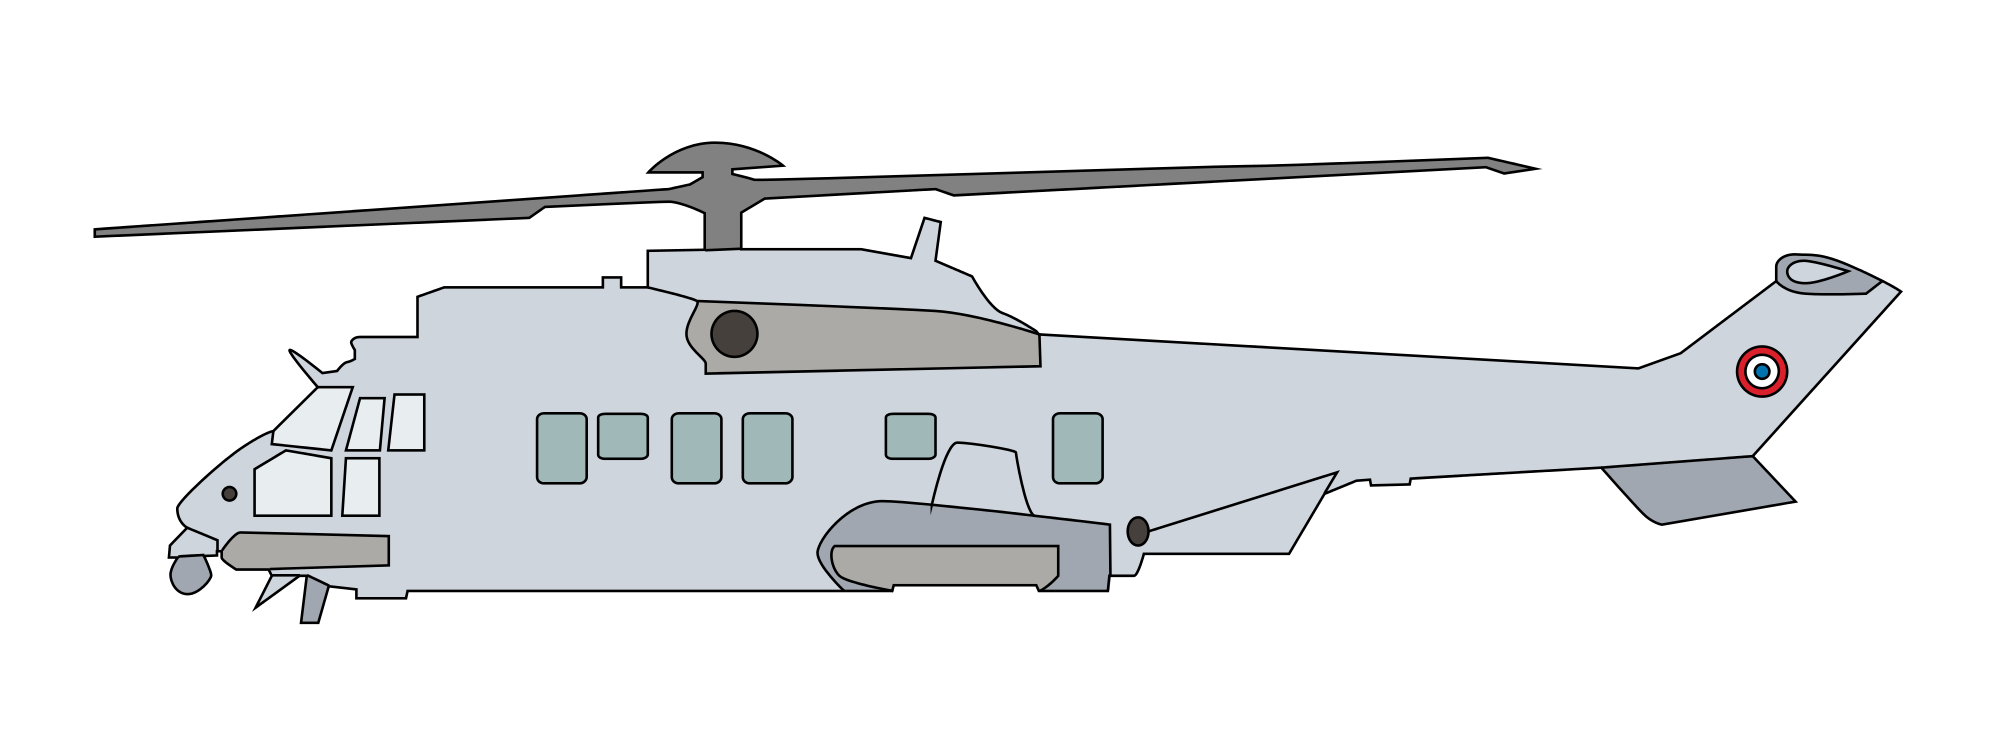 Caracal svg #18, Download drawings